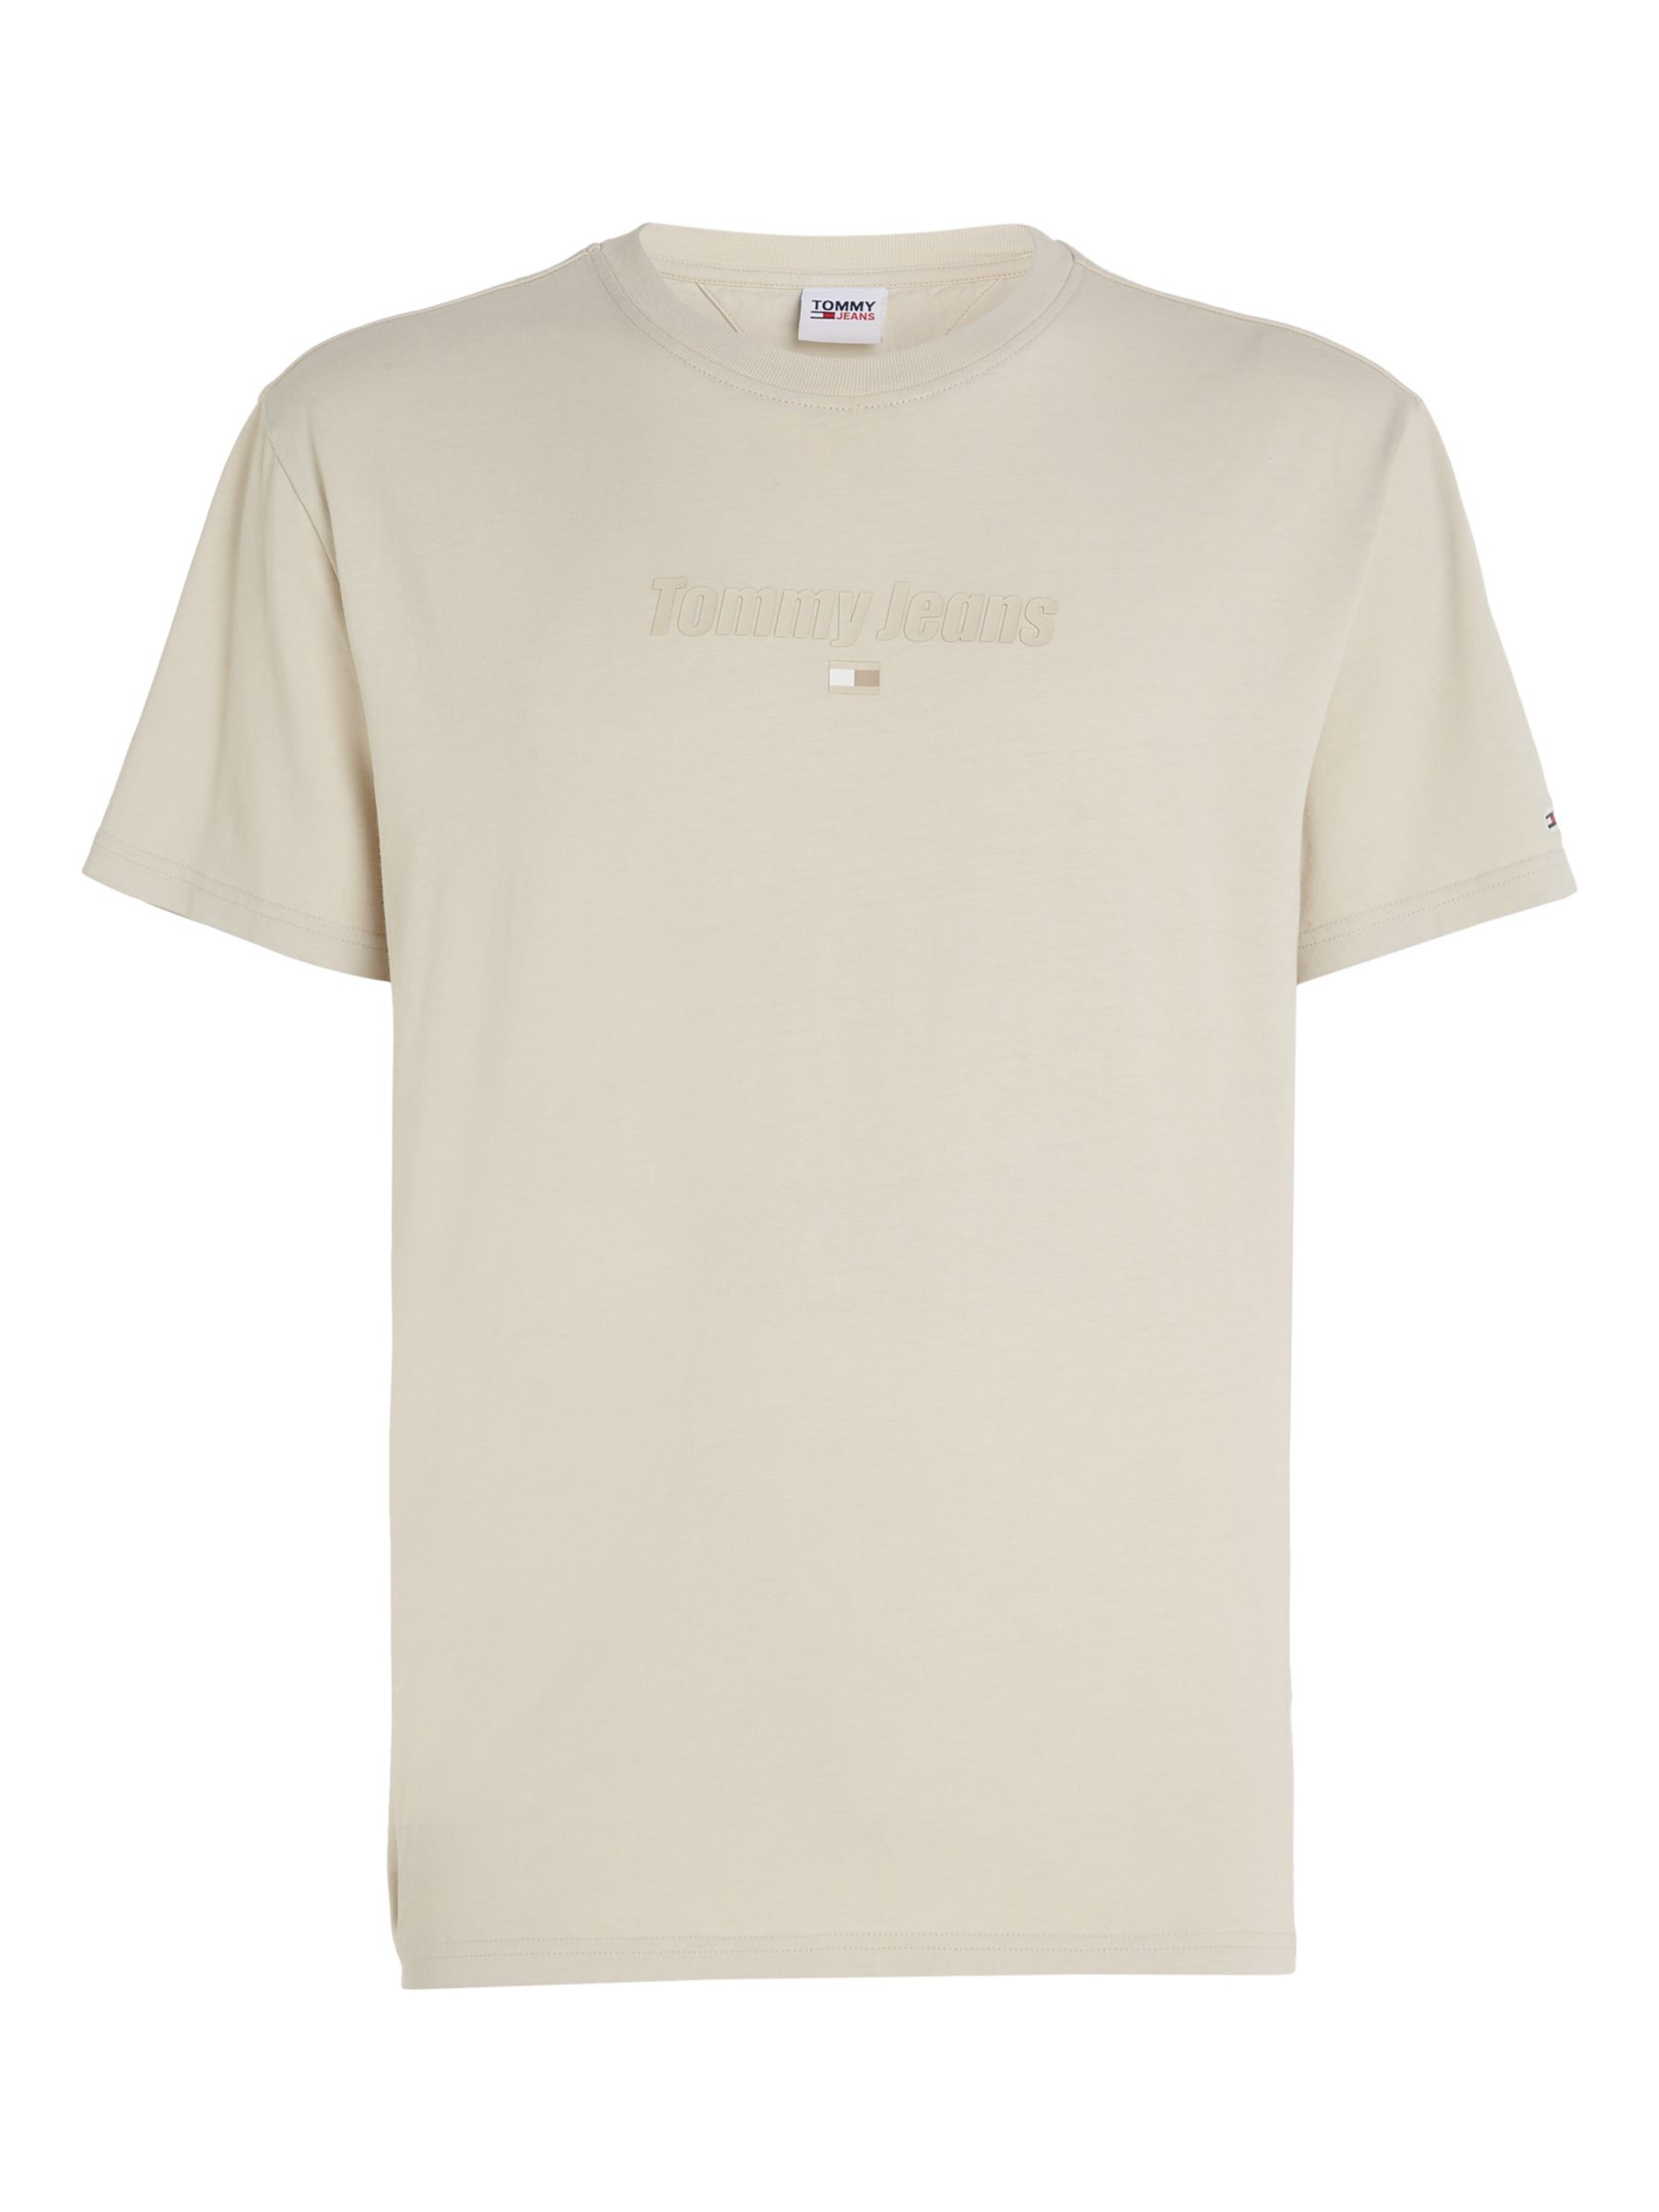 Buy Tommy Hilfiger Tonal Logo Classic Fit T-Shirt - Tommy Jeans